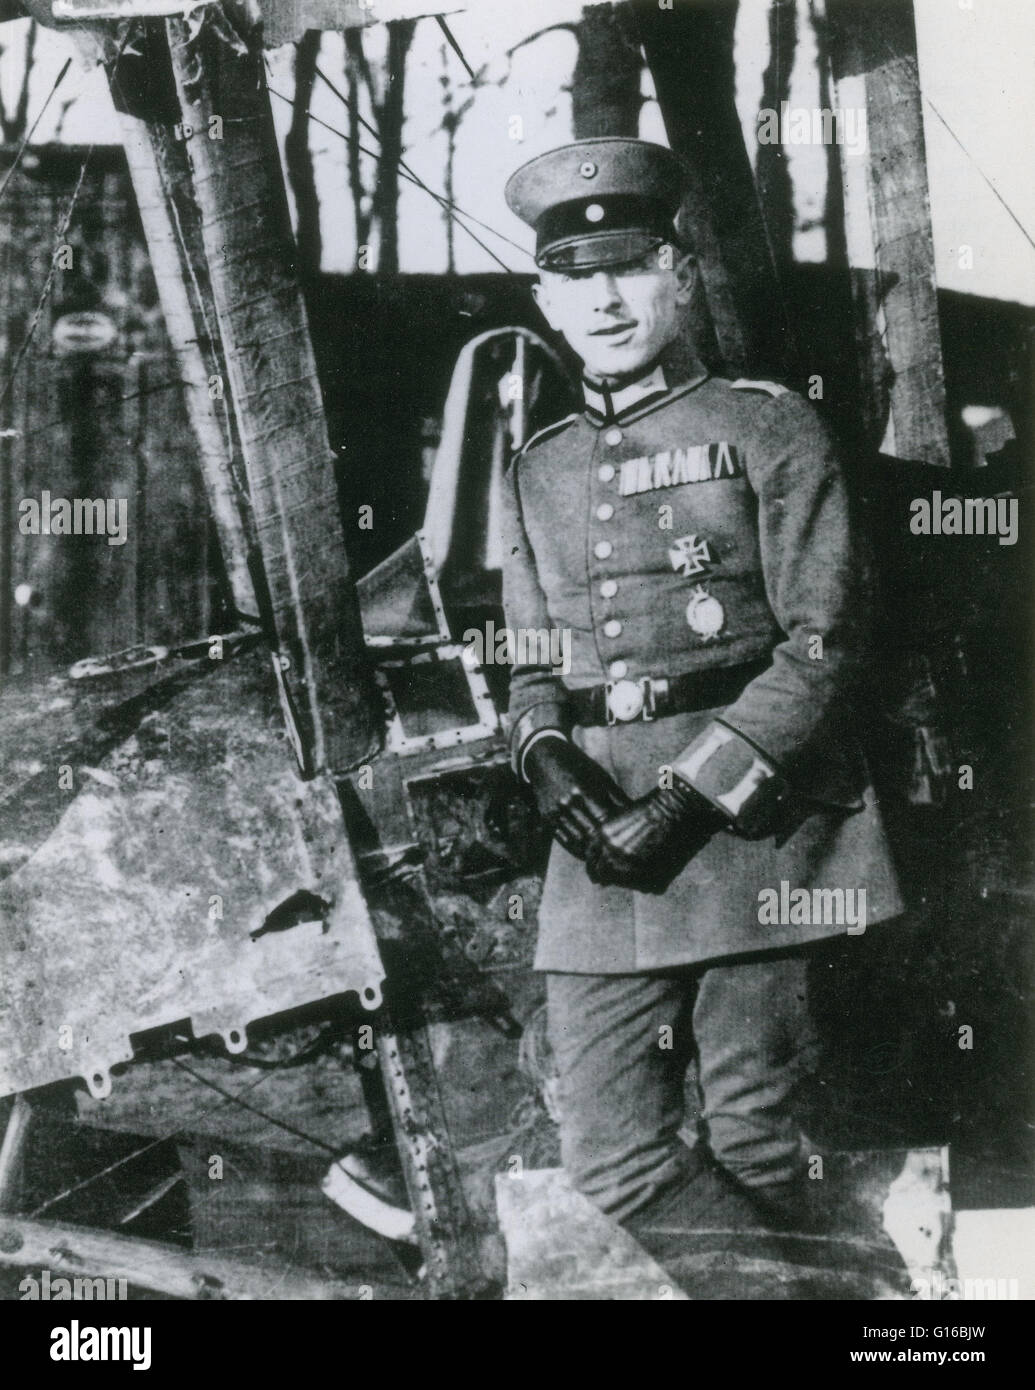 Immelmann posing beside one of his kills. Max Immelmann (September 21, 1890 - June 18, 1916) was the first German WWI flying ace. He was born in South Africa but chose to renounce his British nationality while studying medicine in Germany. Having thereaft Stock Photo